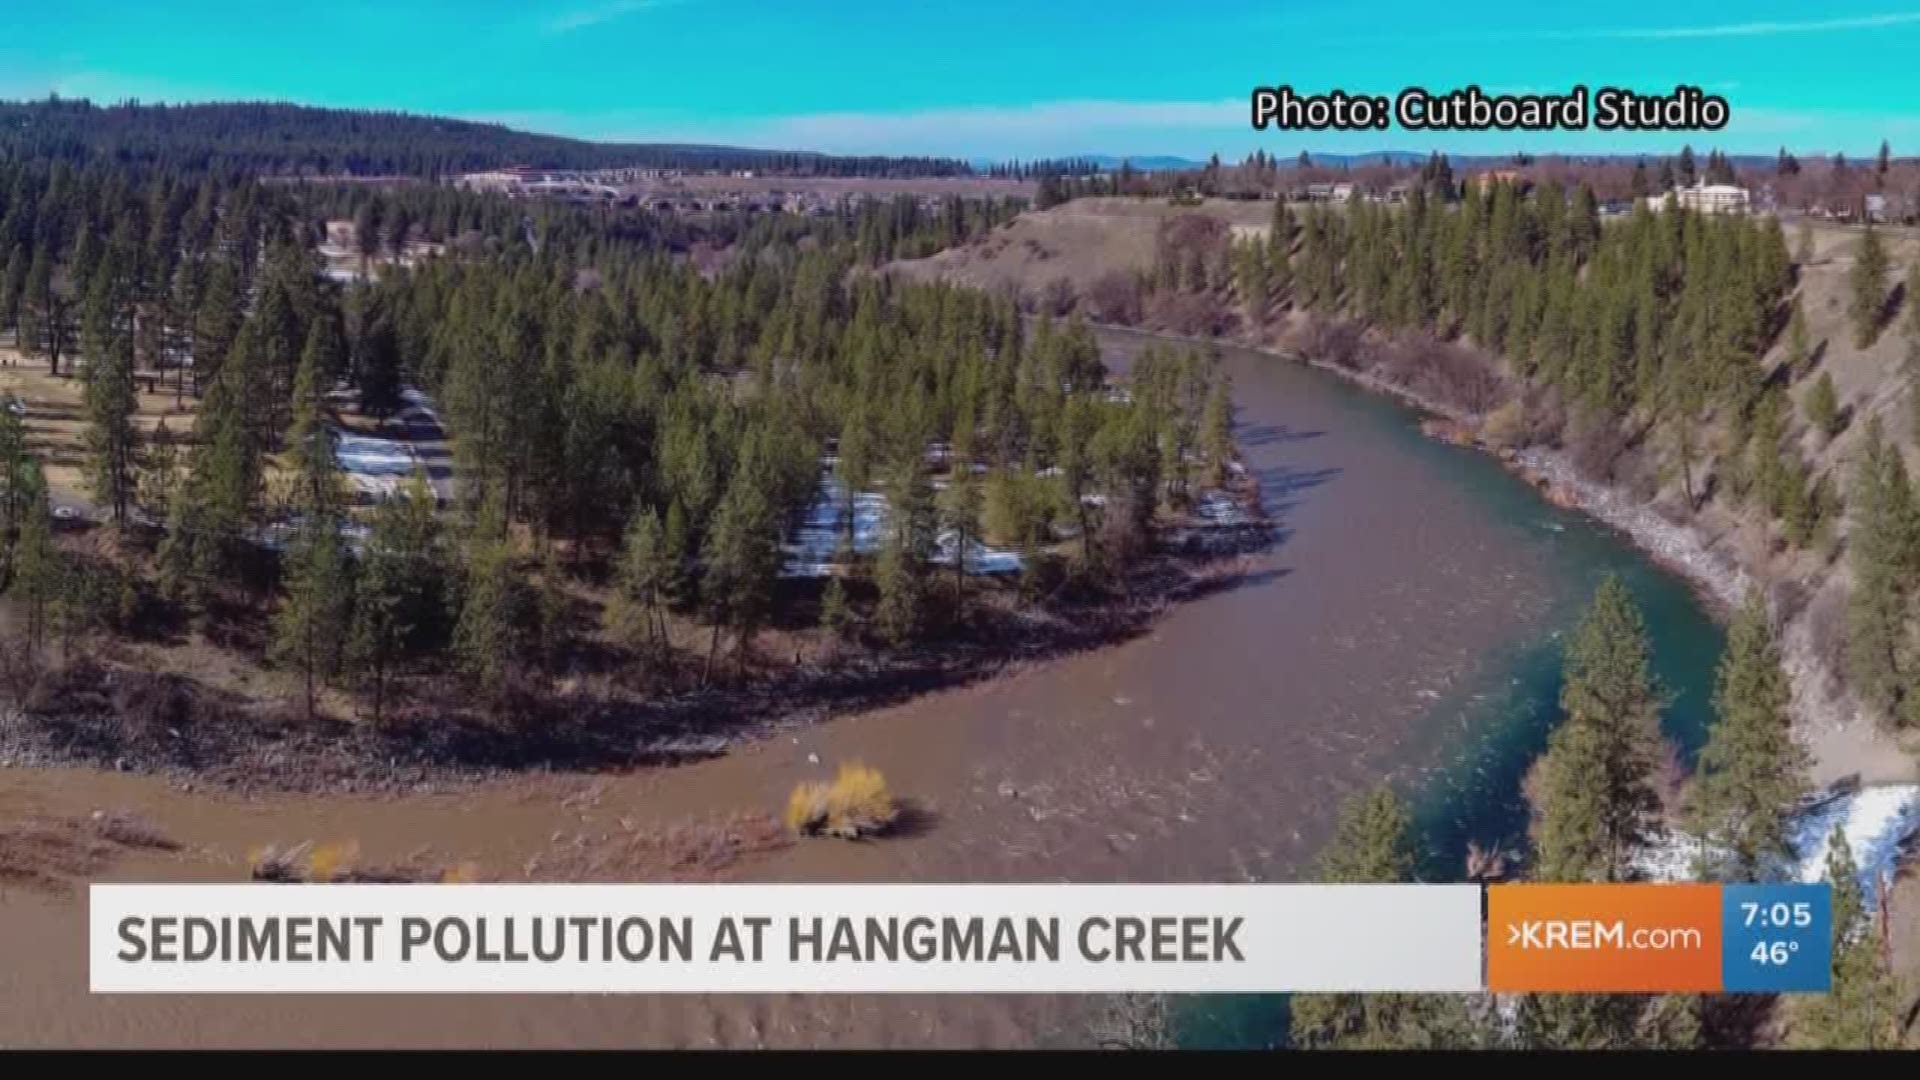 Jerry White with Spokane Riverkeeper said the group sees a terrible sediment and pollution problem at Hangman Creek between July and October of each year.